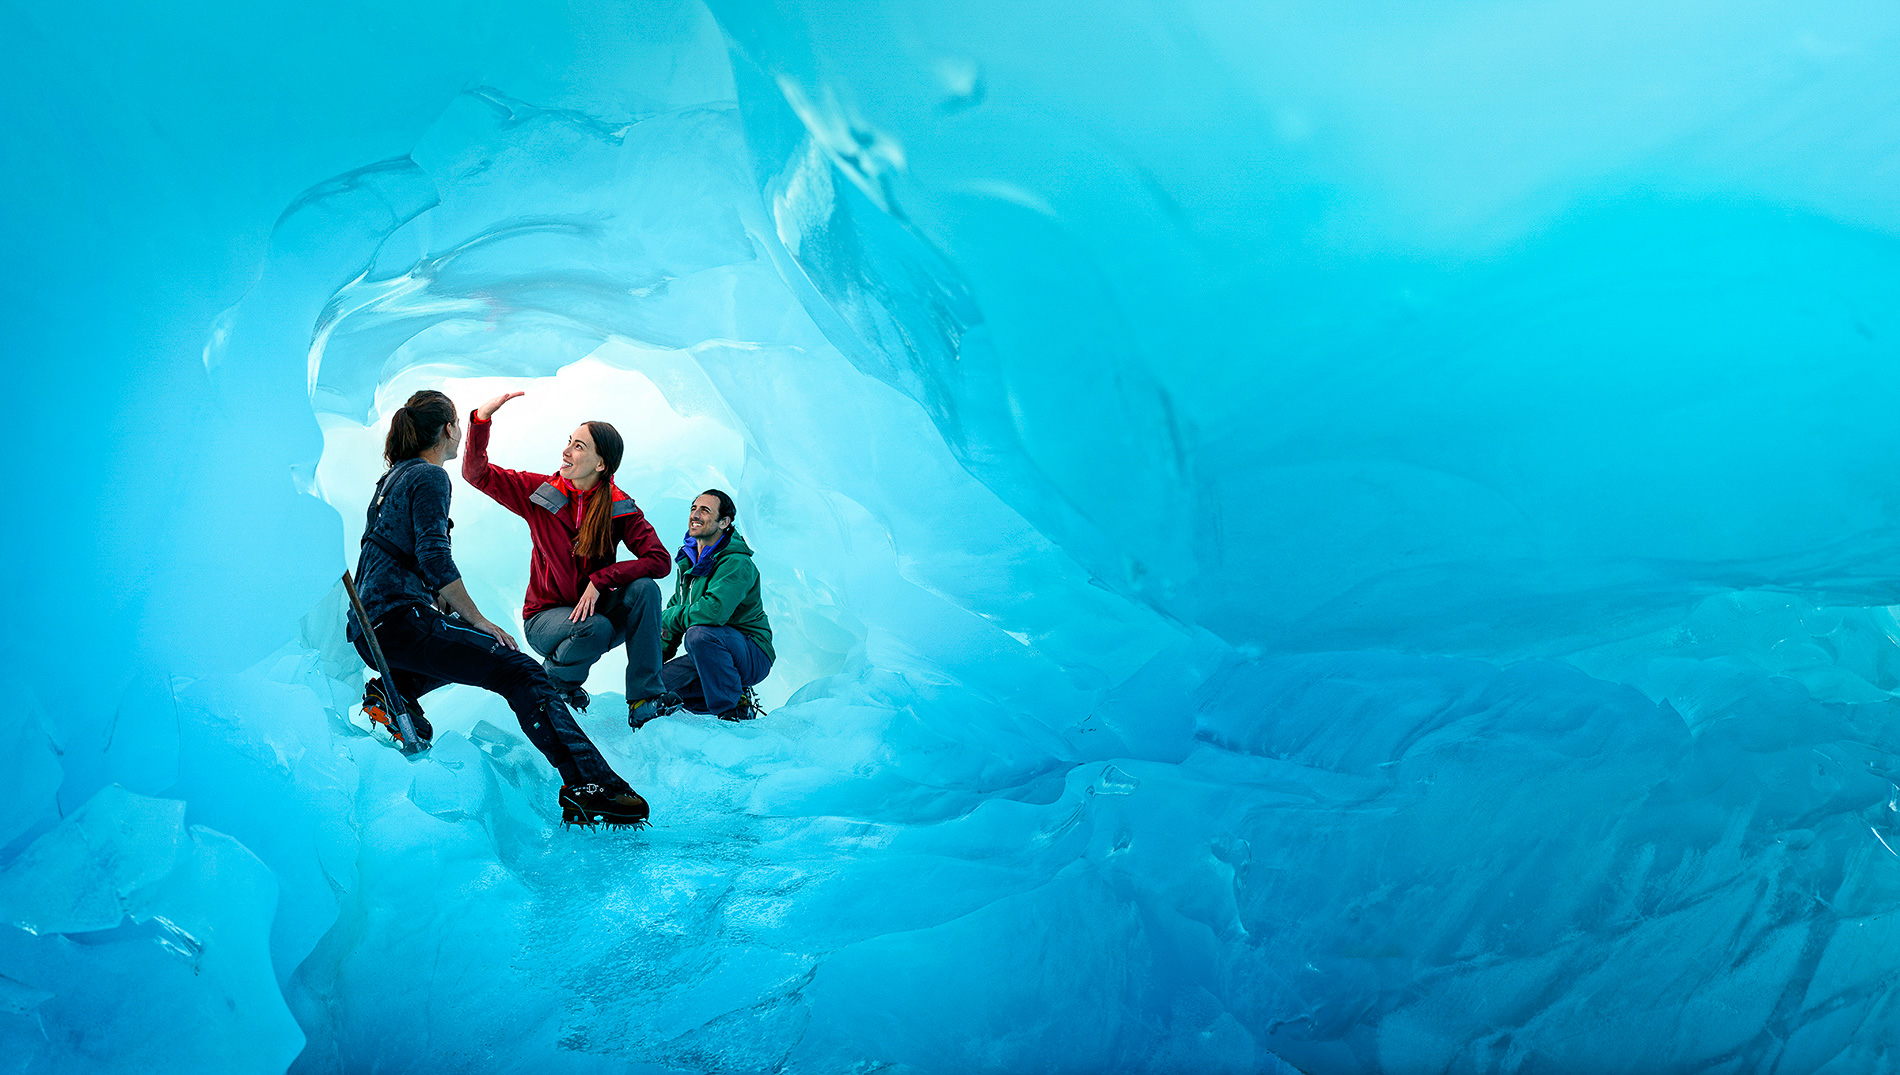 Fox Glacier New Zealand Photography for New Zealand Tourism. Fraser Clements Photographer Lifestyle image